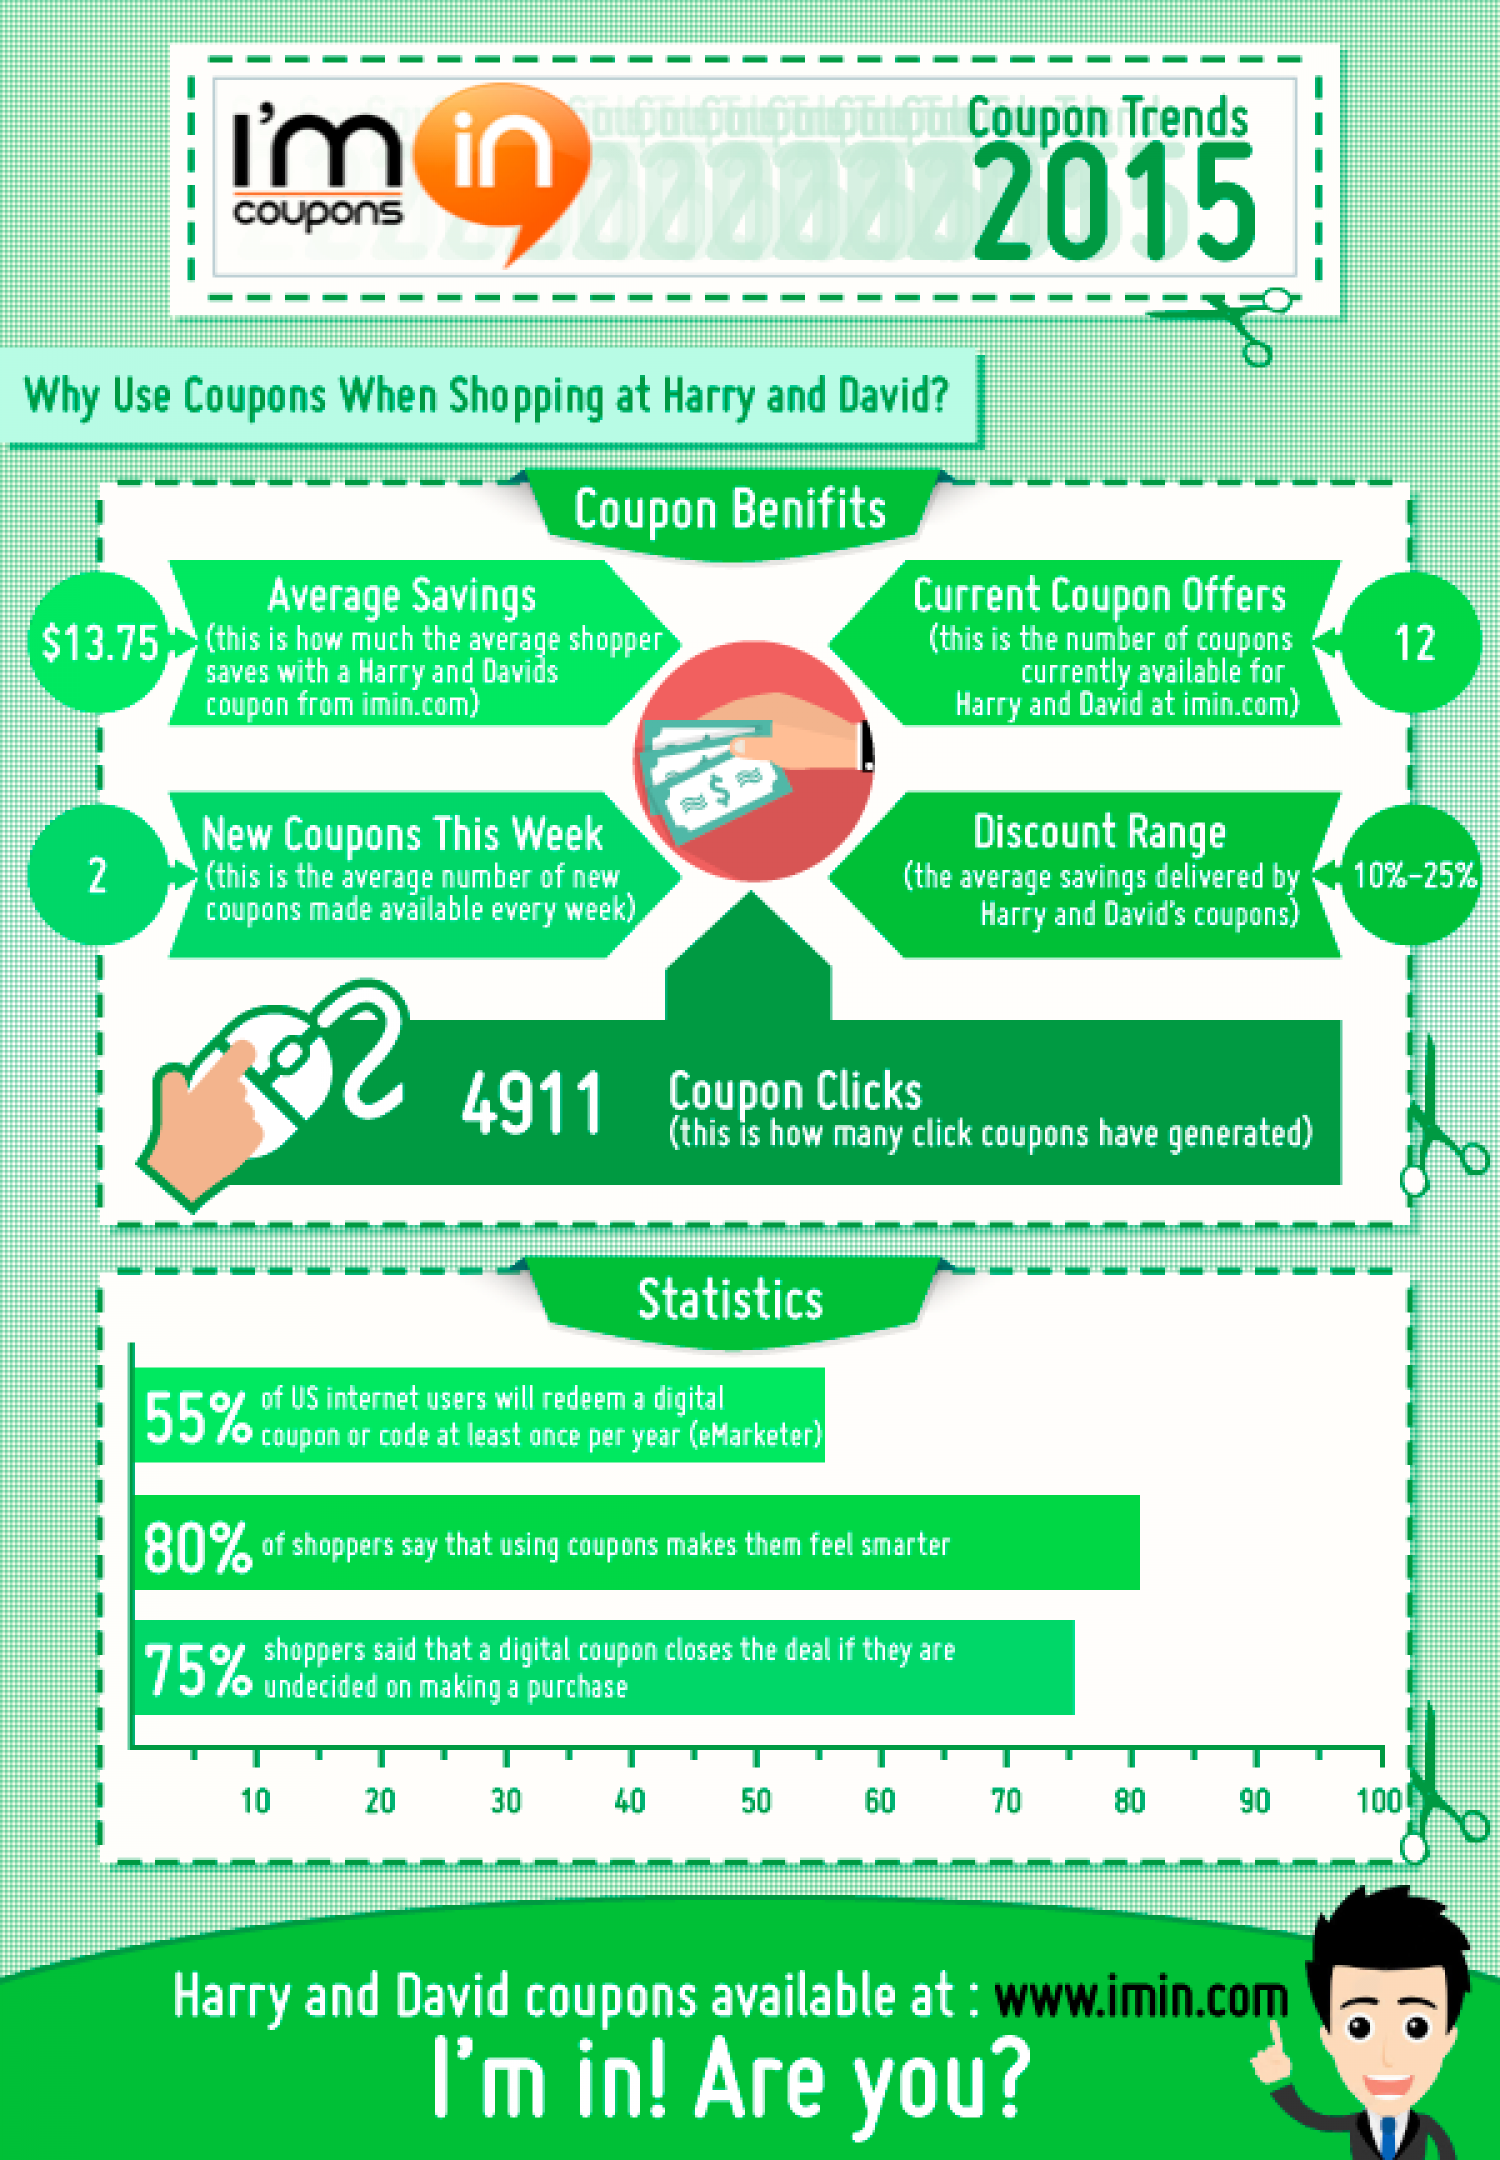 How Much Can You Save with Harry and David Coupons in 2015 Infographic